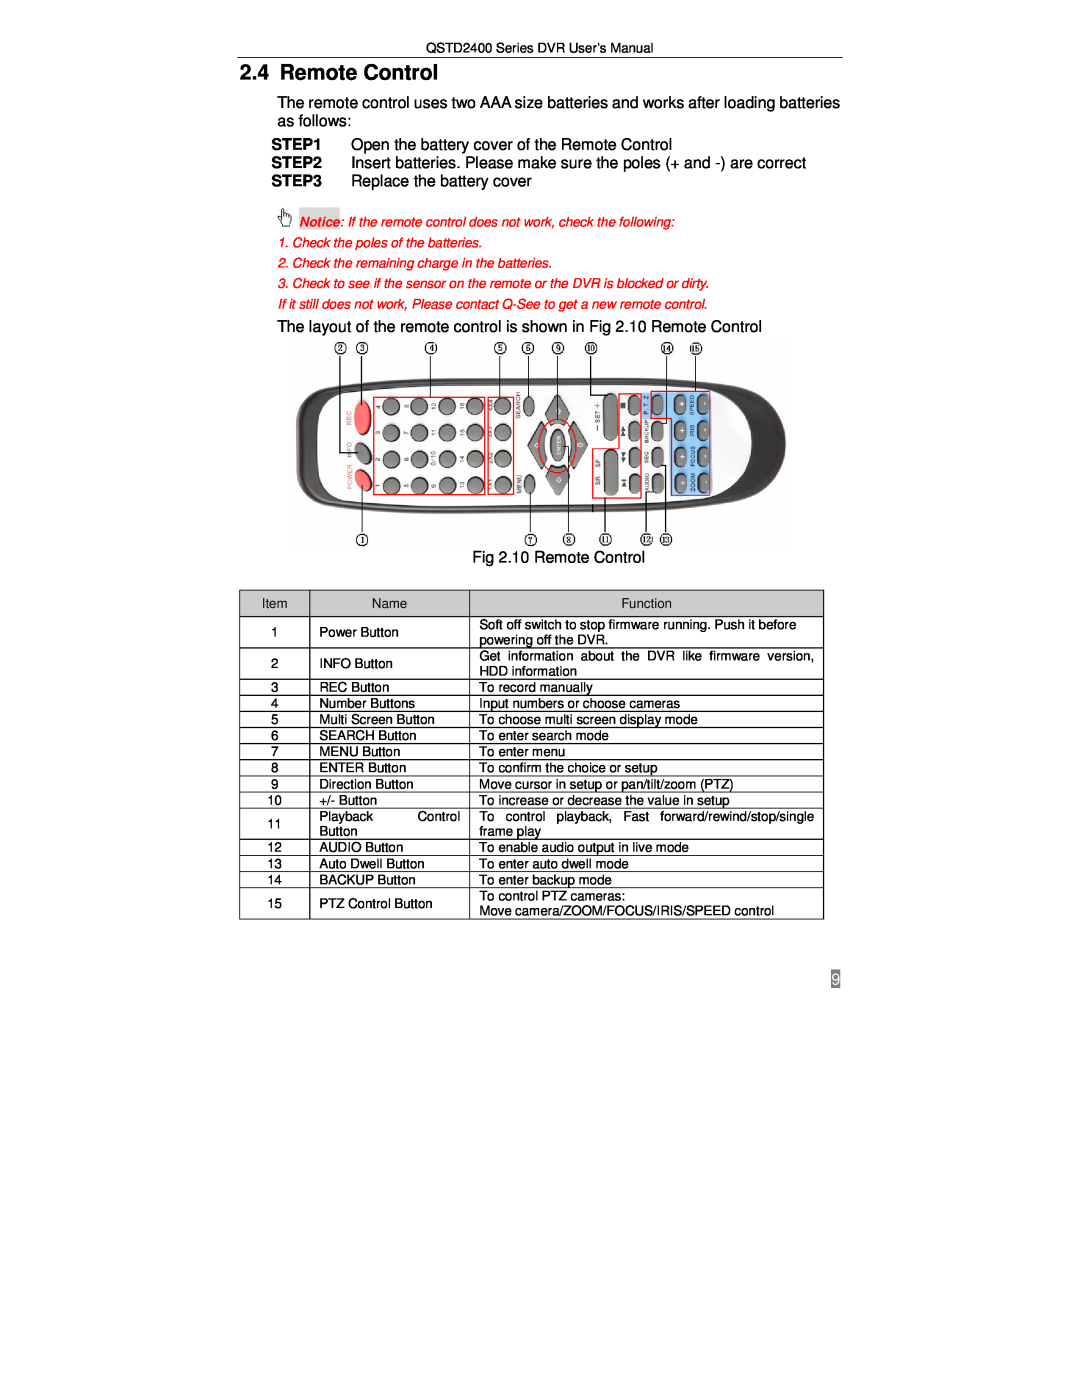 Q-See QSTD2408, QSTD2416, QSTD2404 user manual Replace the battery cover, 10 Remote Control 